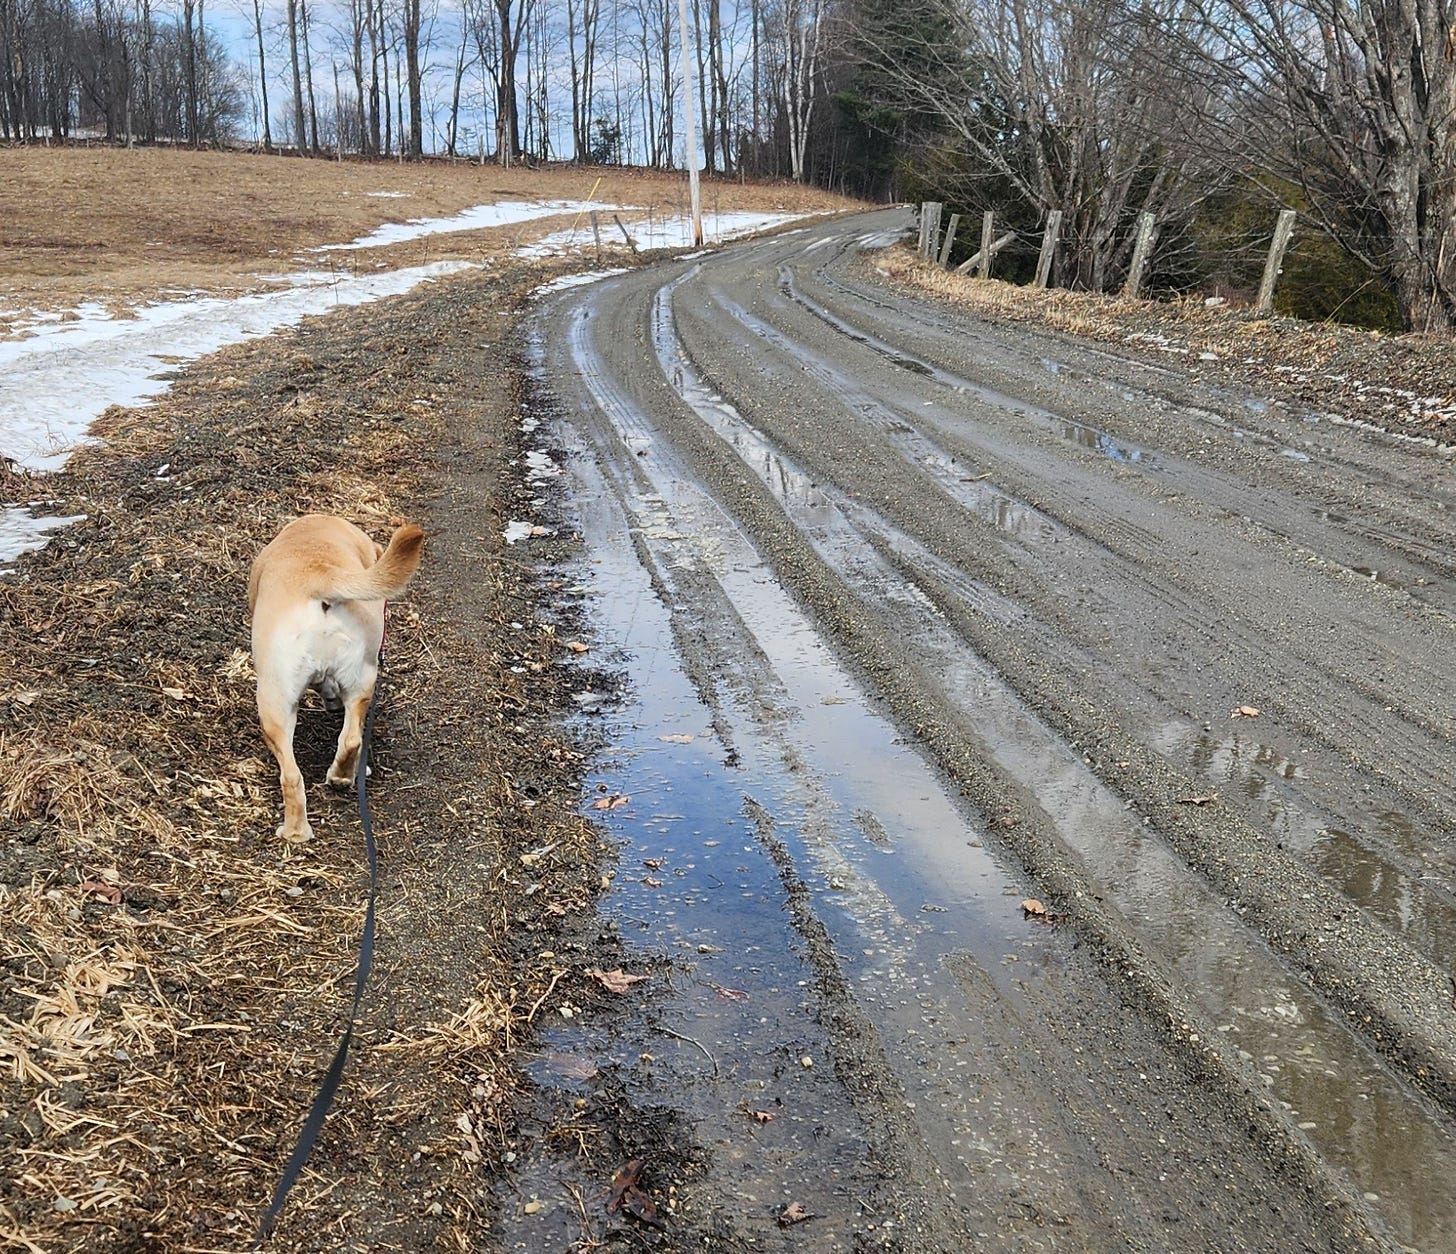 Muddy vermont road in mud season with yellow lab